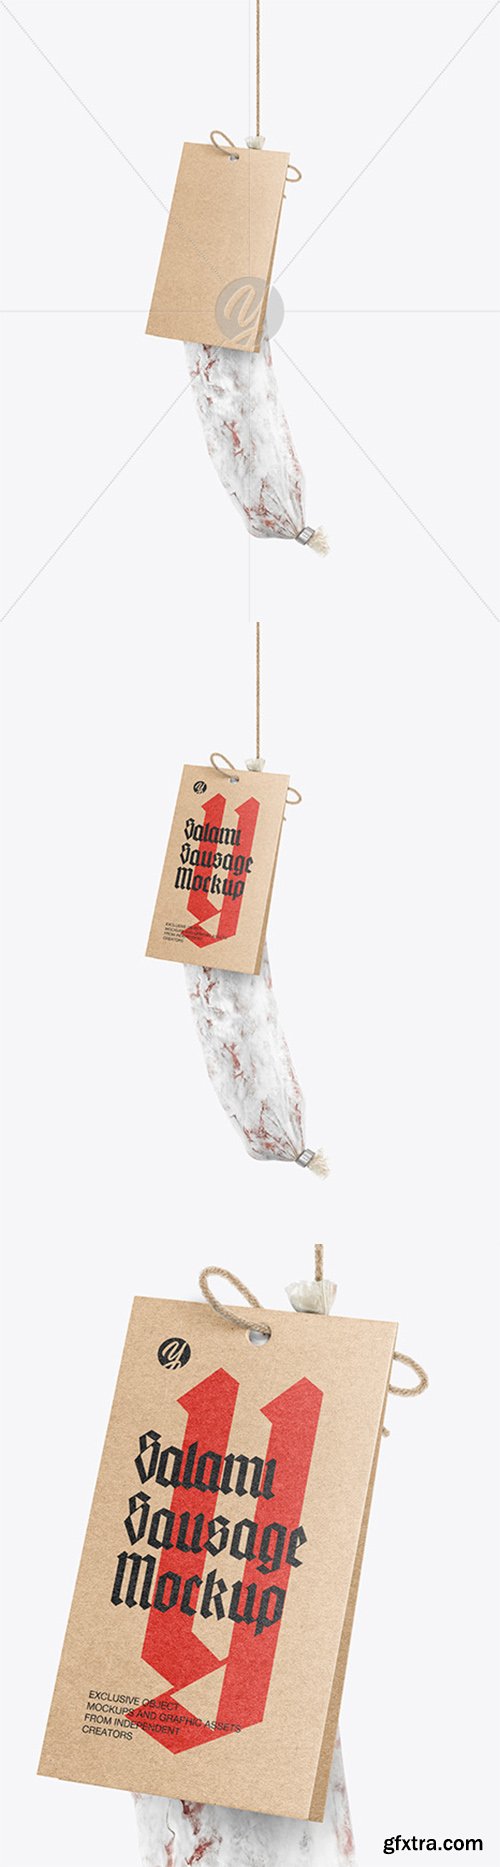 Dried Salami in White Mold Mockup 55395